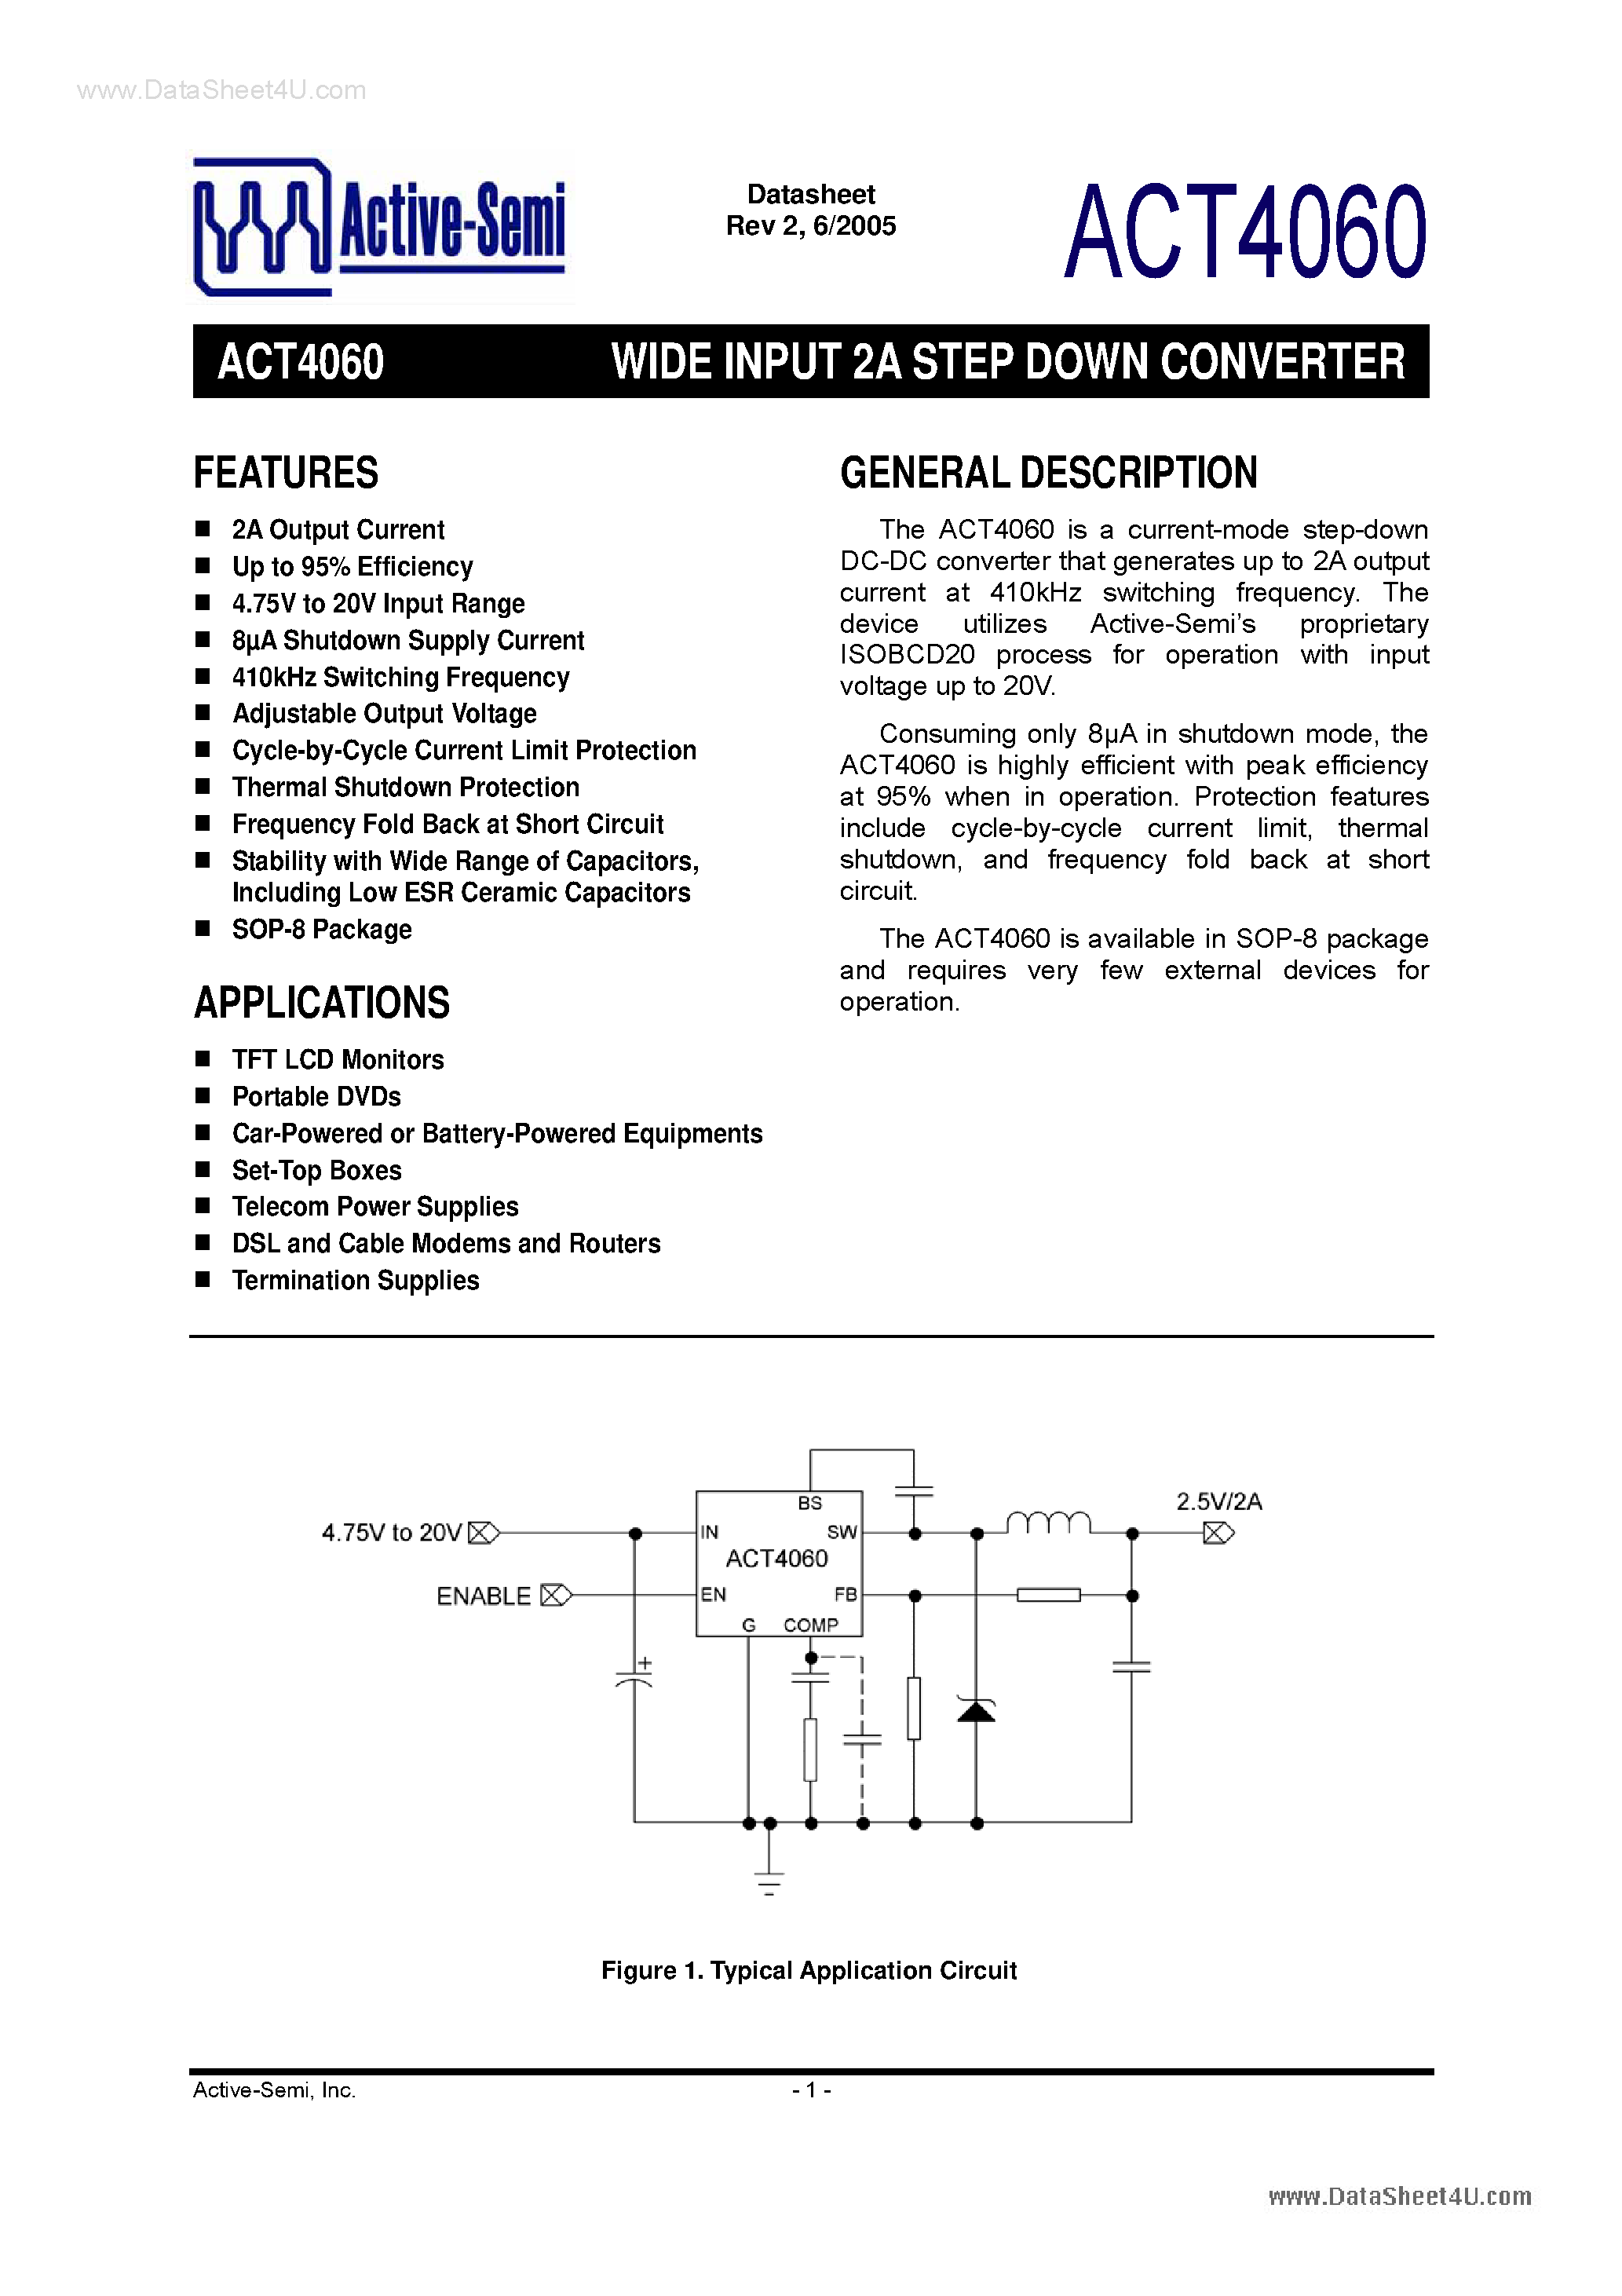 Datasheet ACT4060 - Wide Input 2A Step Down Converter page 1